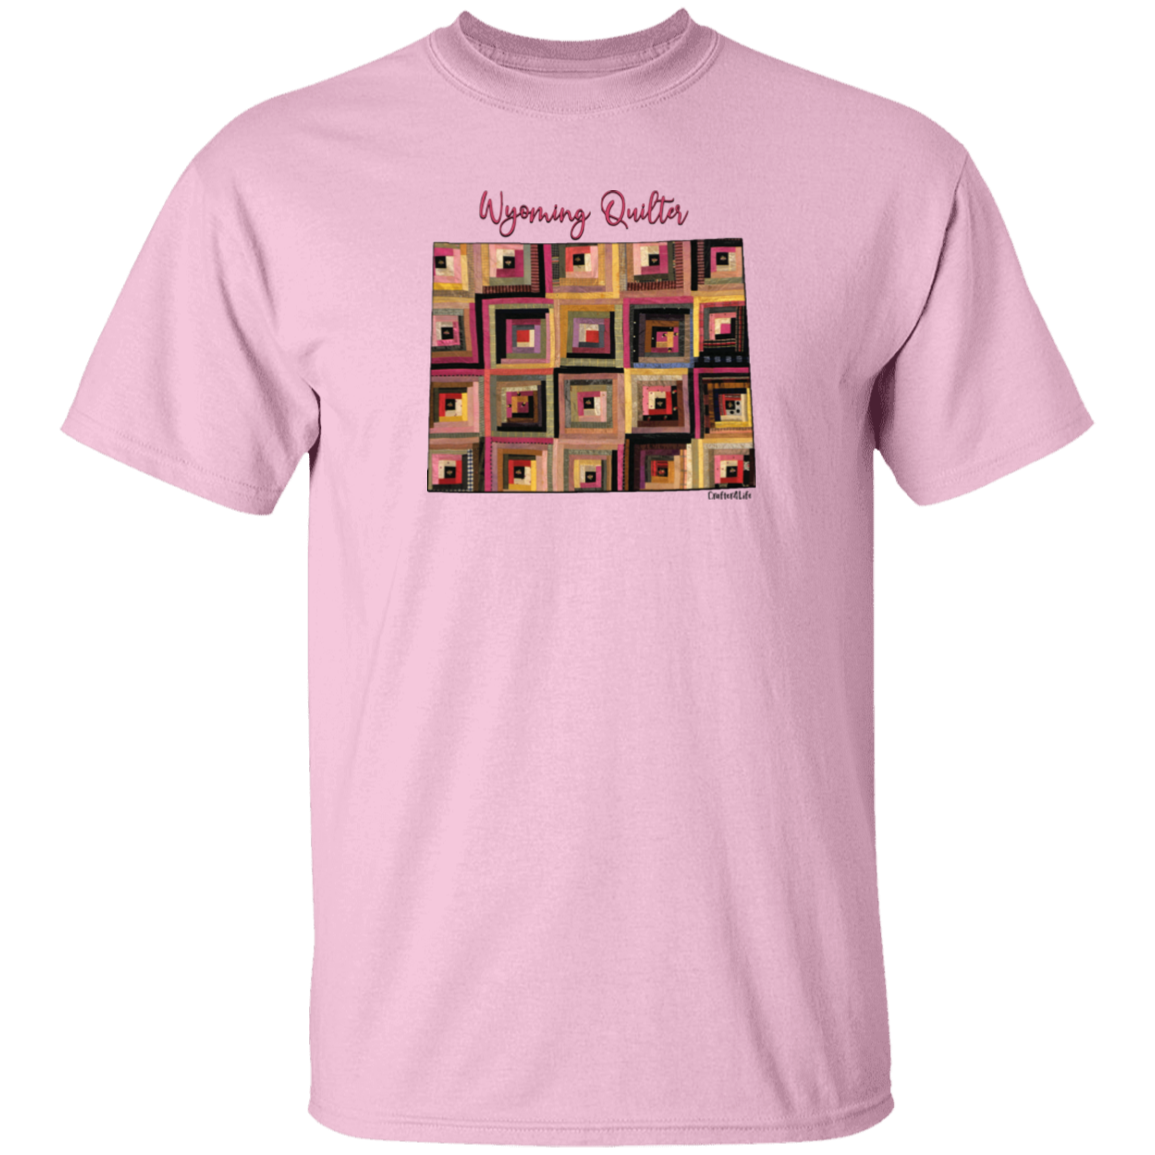 Wyoming Quilter T-Shirt, Gift for Quilting Friends and Family